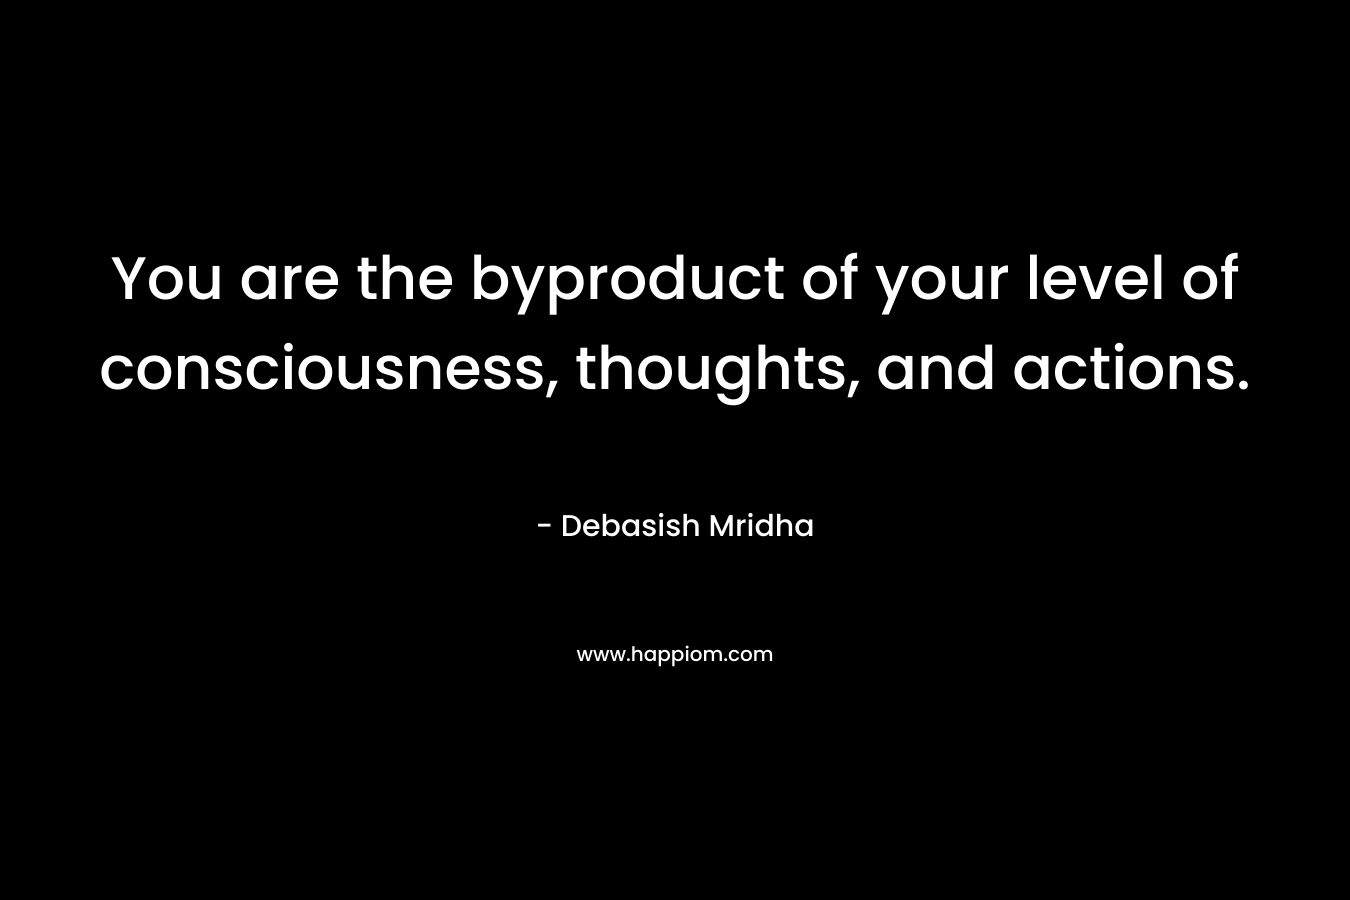 You are the byproduct of your level of consciousness, thoughts, and actions.